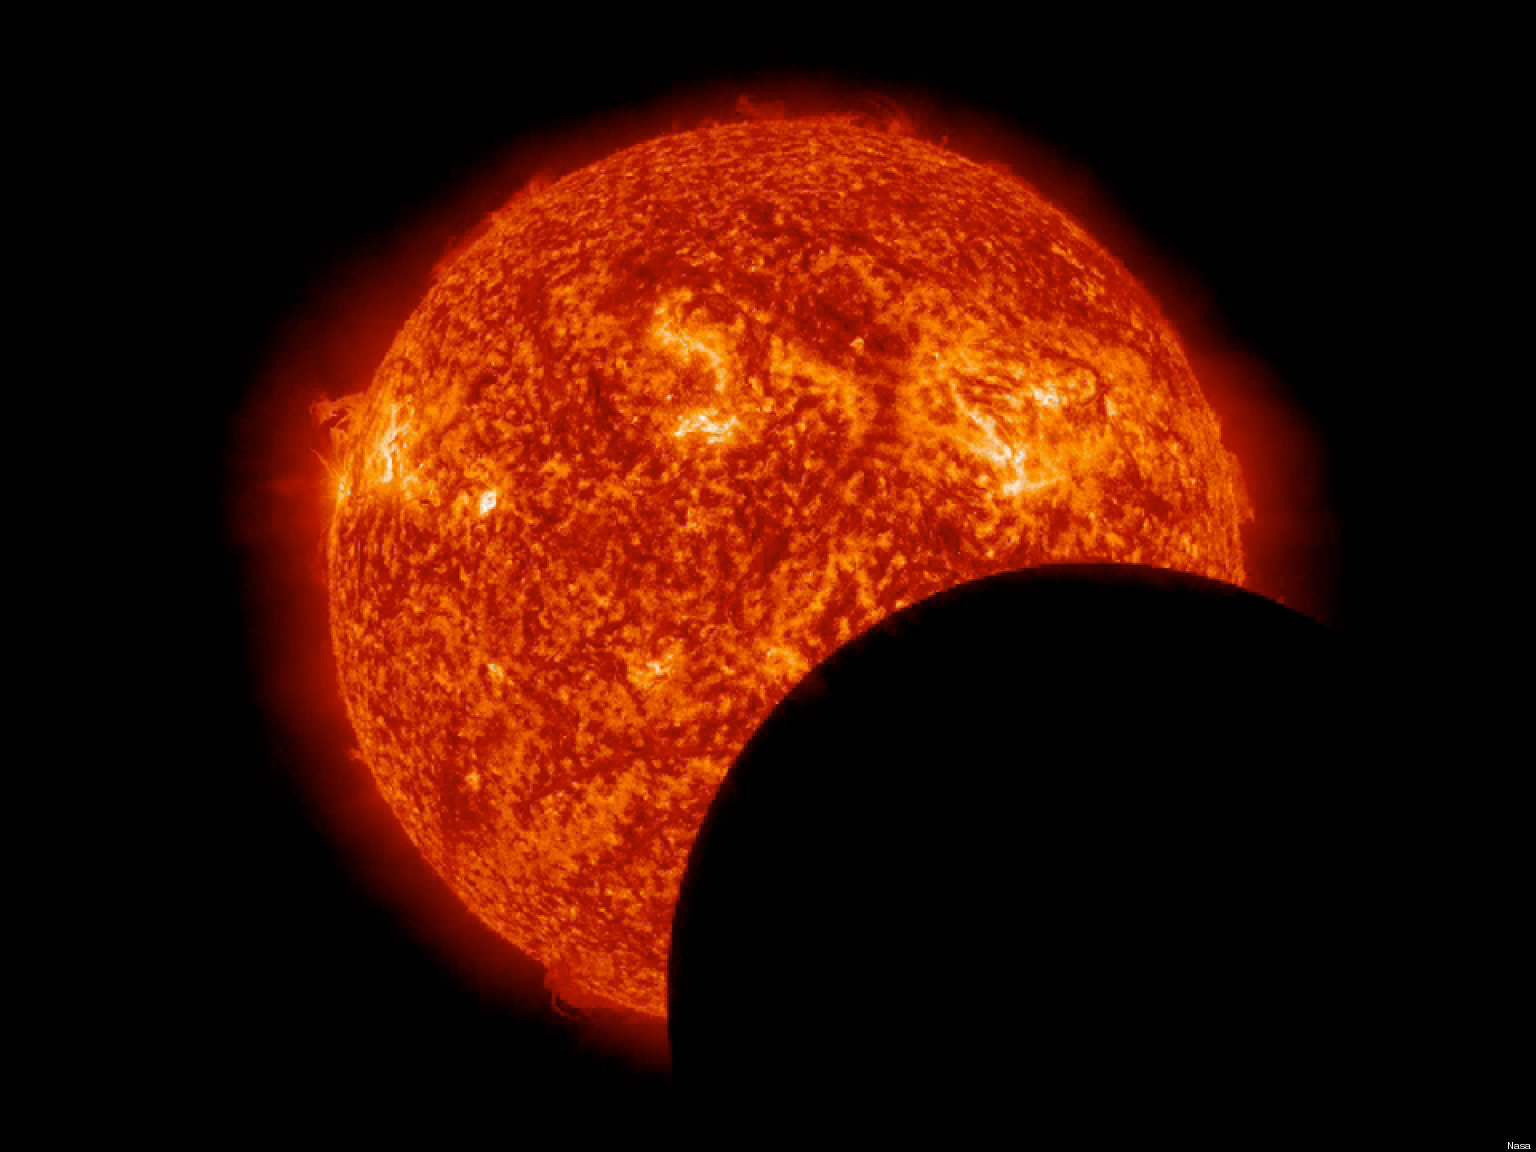 nasa-s-solar-dynamics-observatory-pictures-lunar-transit-in-amazing